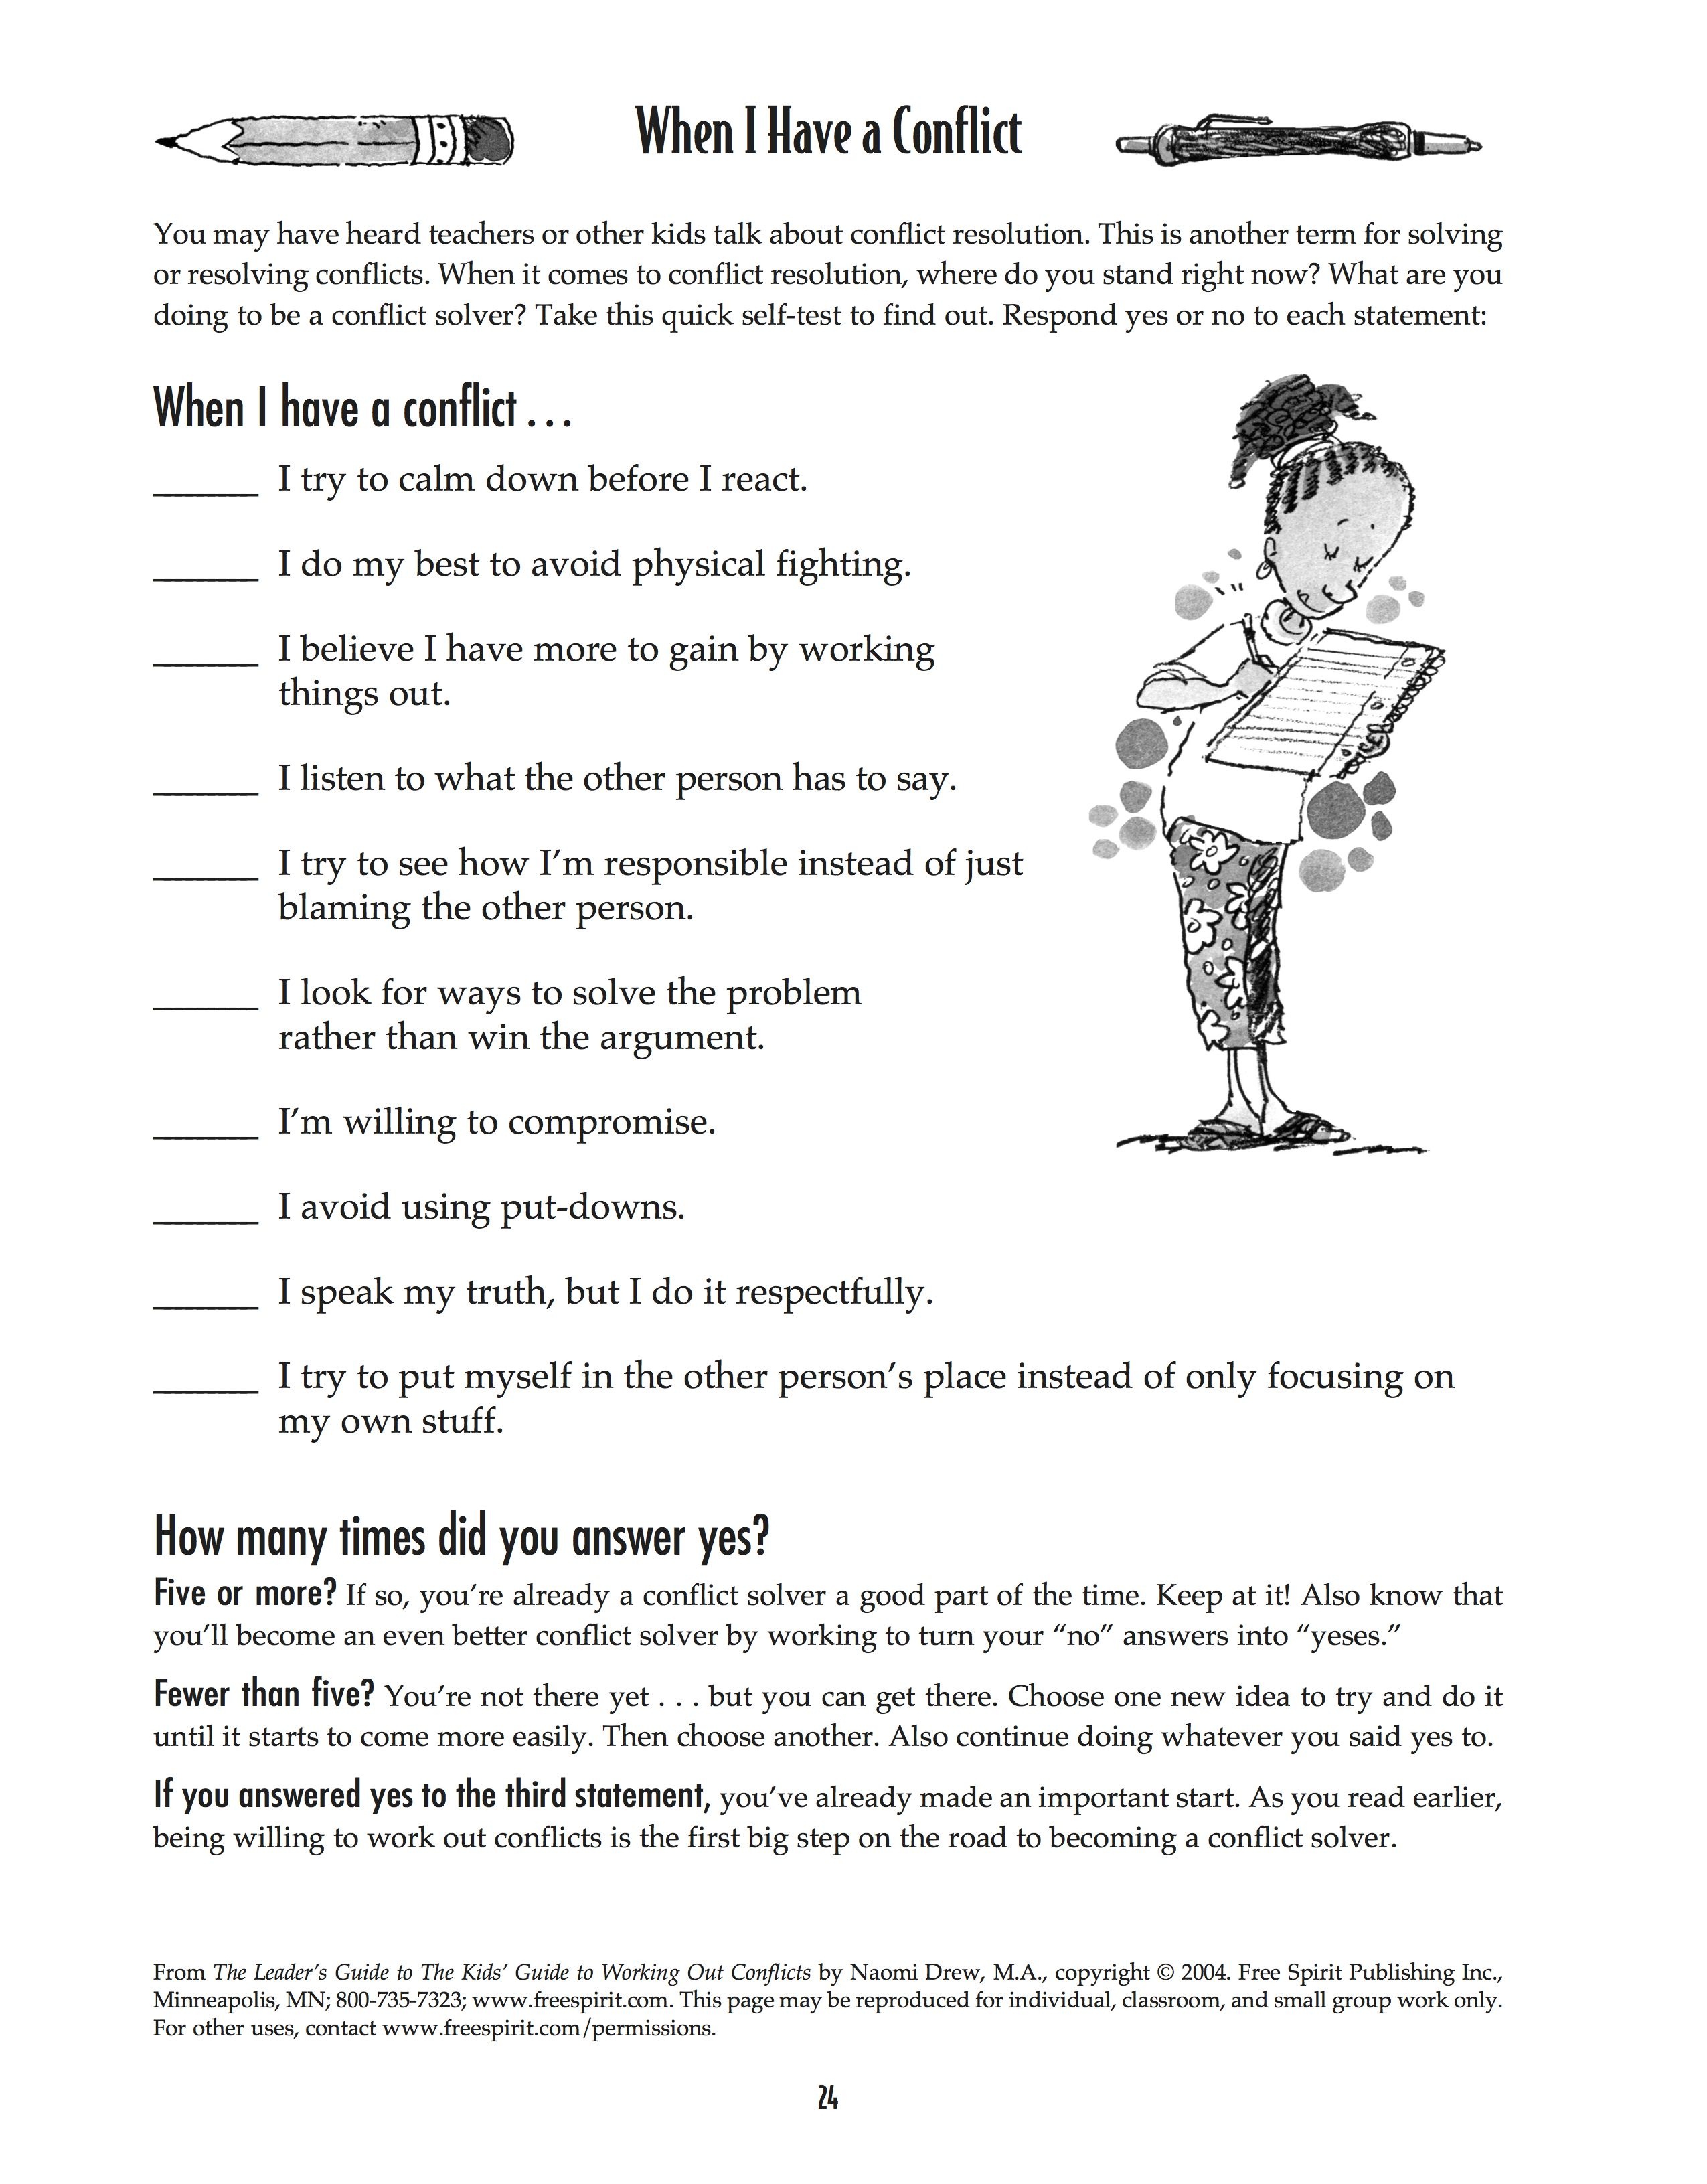 Free Printable Worksheet: When I Have A Conflict. A Quick Self-Test - Free Printable Counseling Worksheets